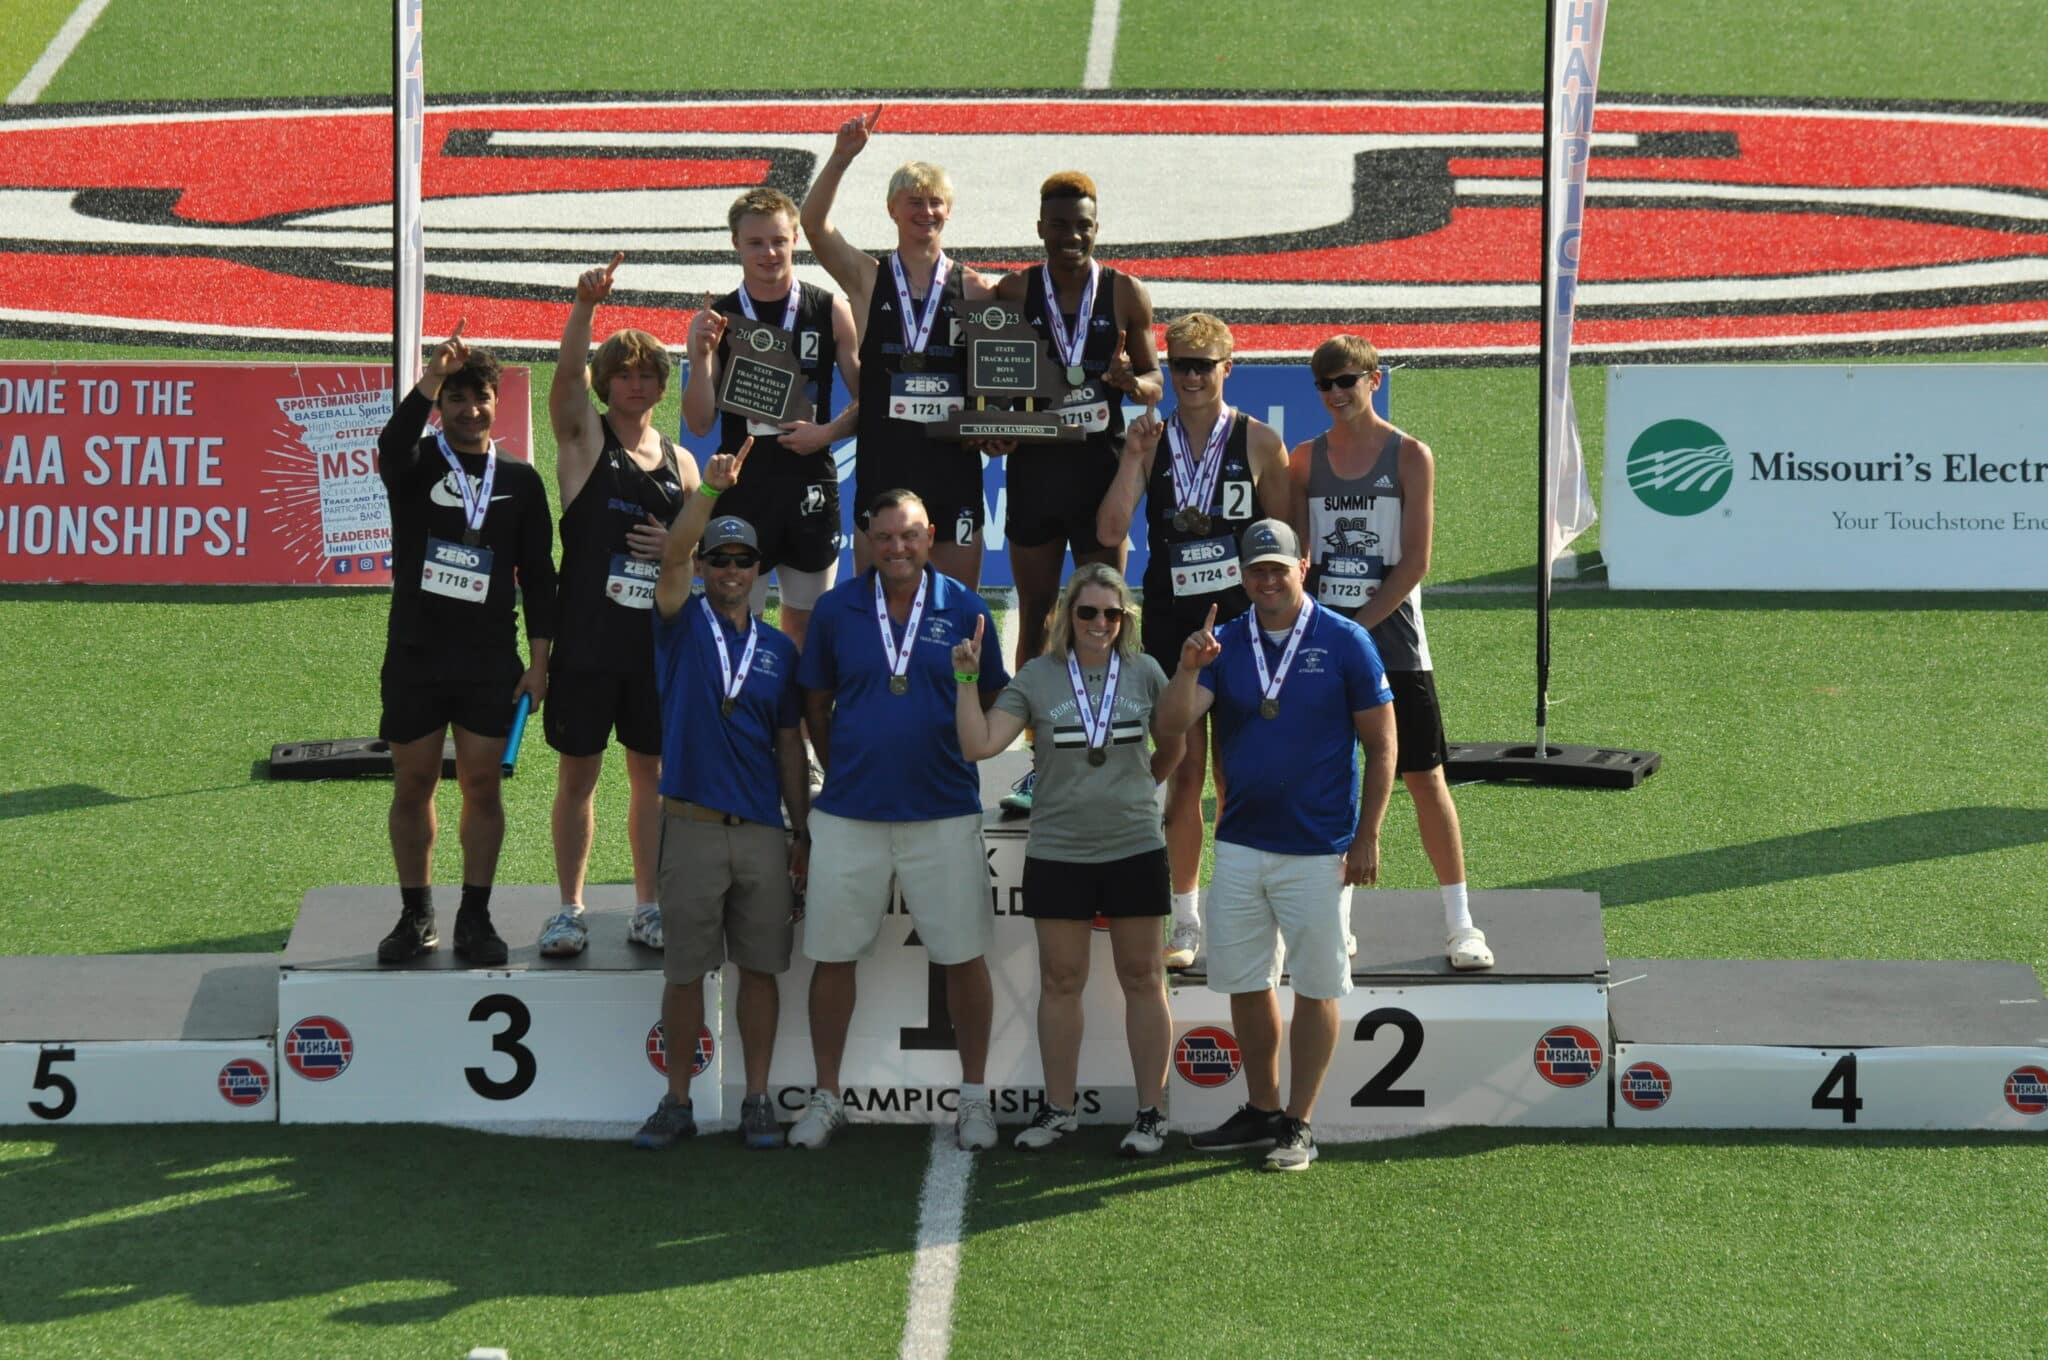 Summit Christian Academy Boys Track and Field placed 1st in the Class 2 State Meet. The team consisted of, (back row, L-R), alternate Preston Goffinet, alternate Julean McGregor, Jake Sutton, Drew Pierce, Marcus Jones, Marcus Verbrugge, and alternate Carter Tripp. The coaching staff included (front row, L-R) Kyle Miller, Dan Phillips, Becky Wiseman, varsity head coach Rick McGregor, Jimmy Woodall (not pictured) and Cade Zucca (not pictured).